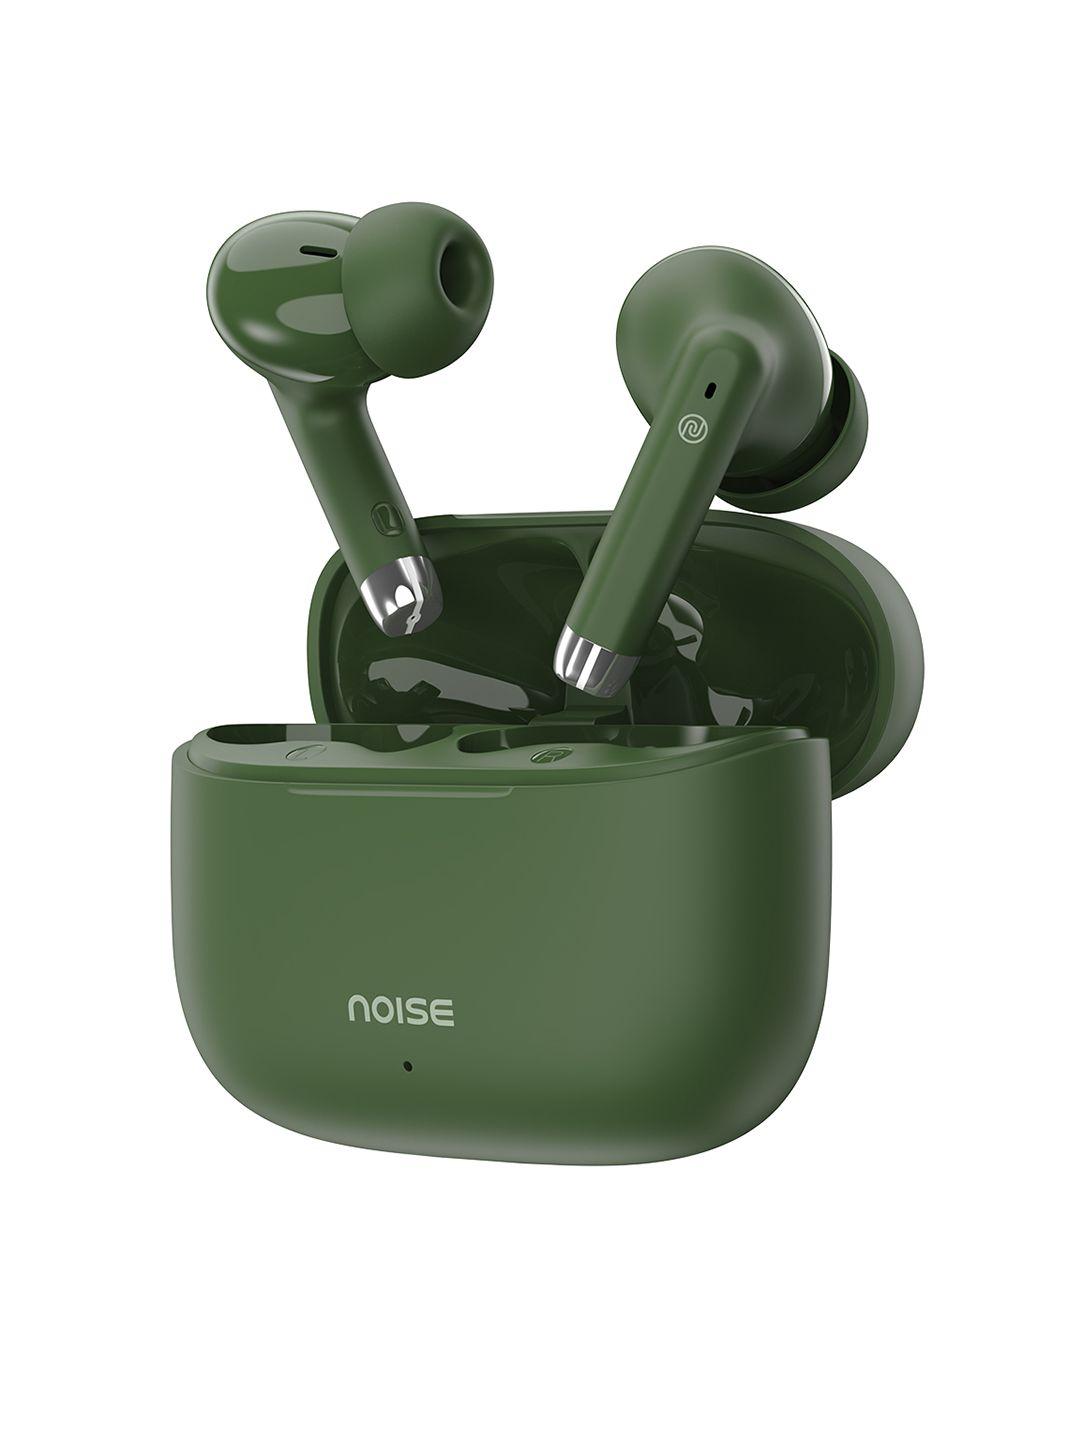 noise-buds-aero-truly-wireless-earbuds-with-45hrs-playtime-and-13mm-driver---forest-green